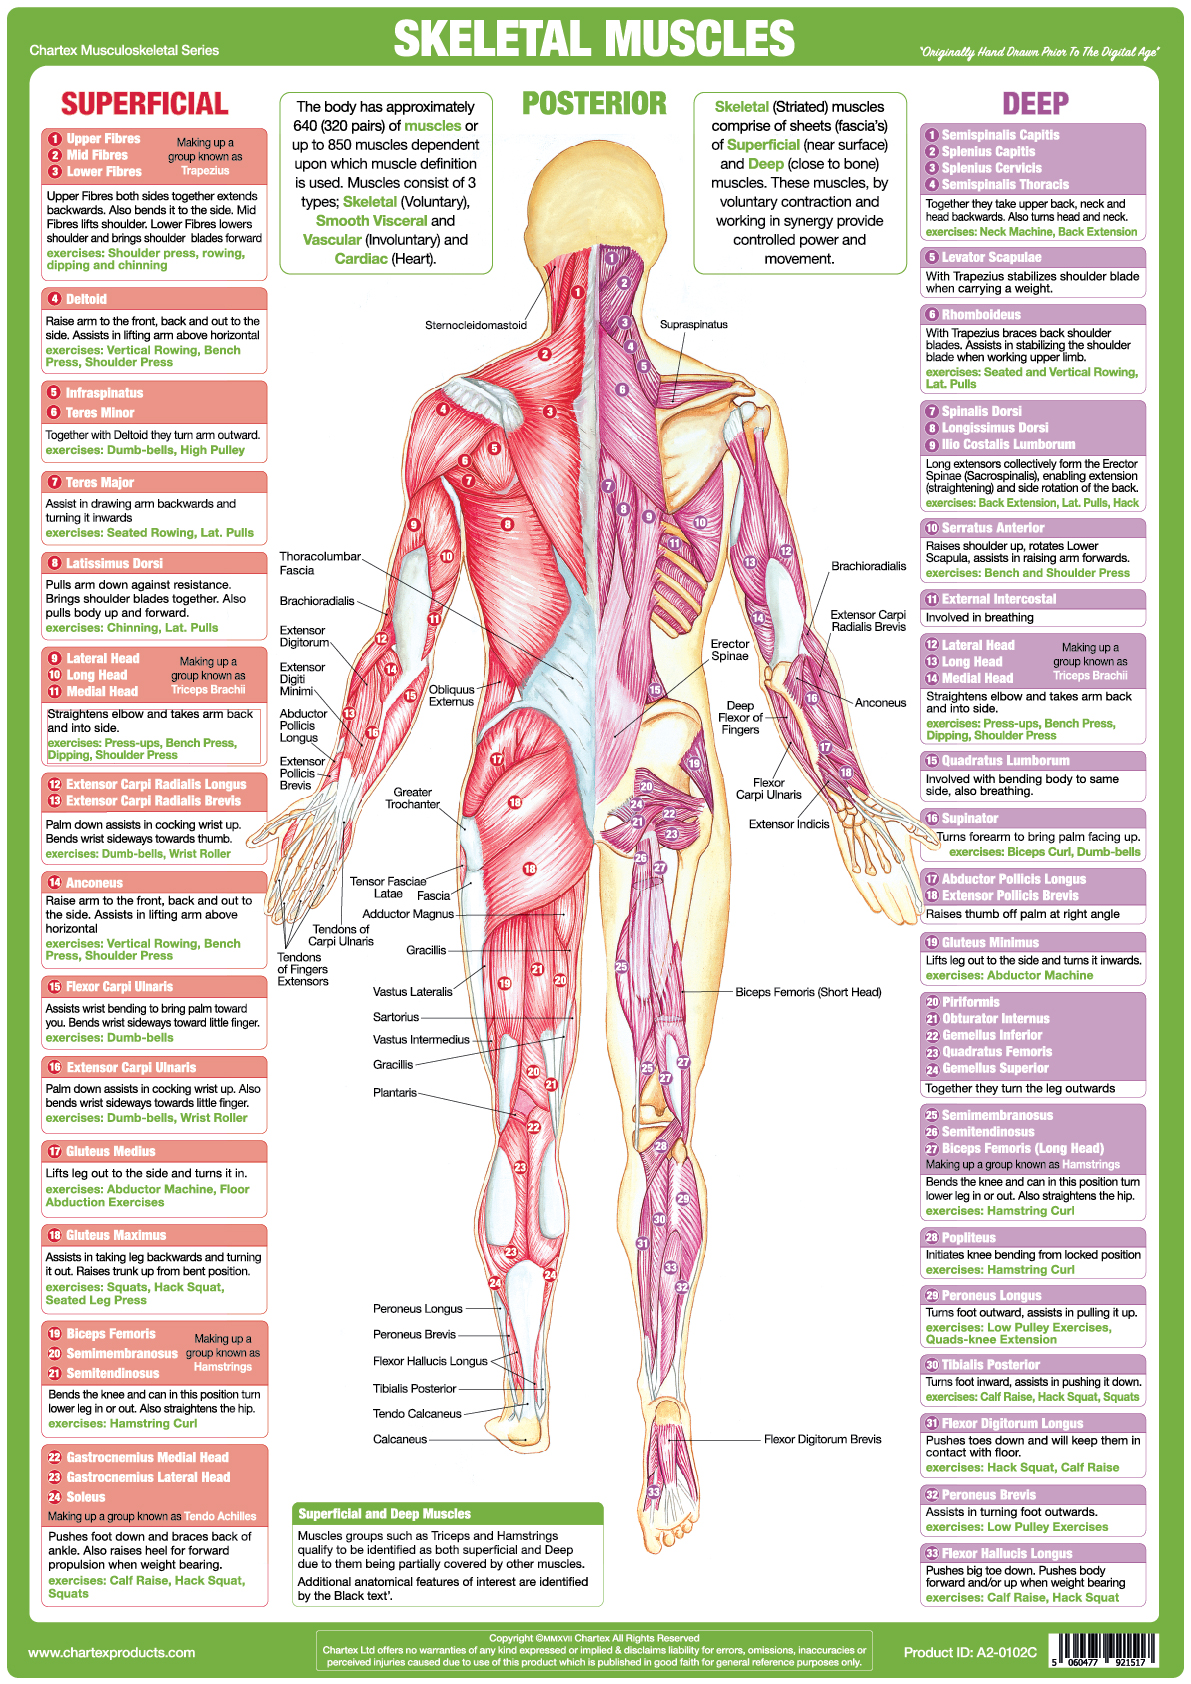 Skeletal Muscles - Posterior - A1 Chart